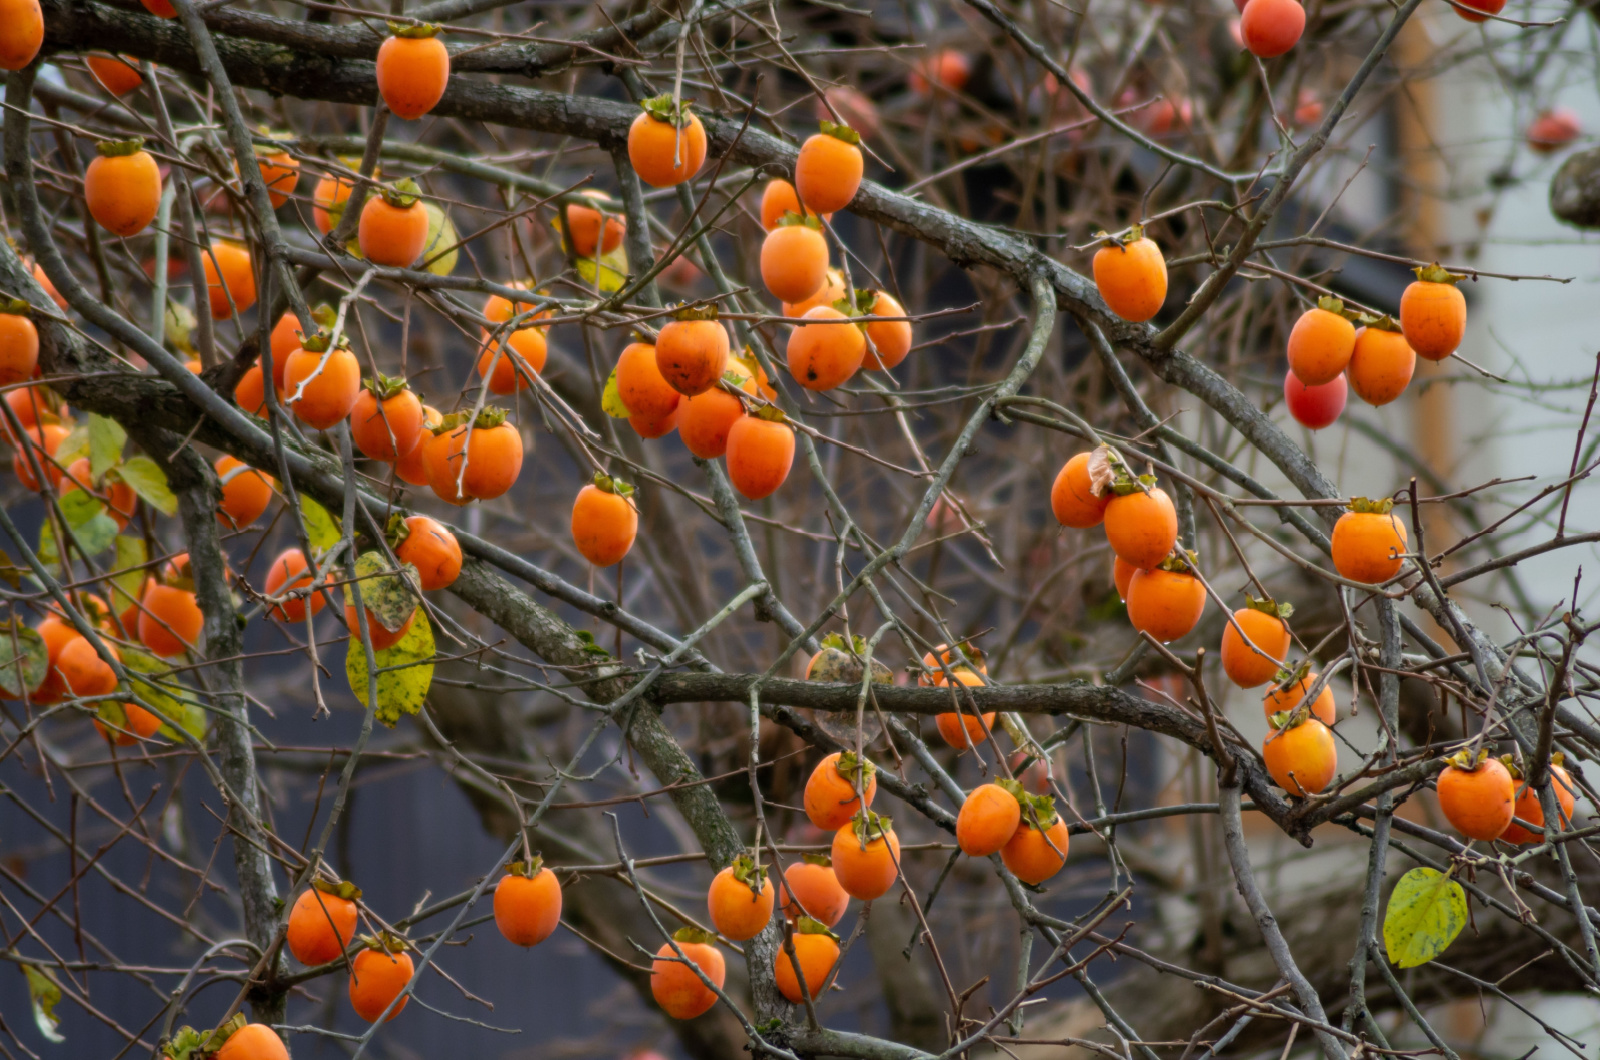 orange persimmon fruits on the branches